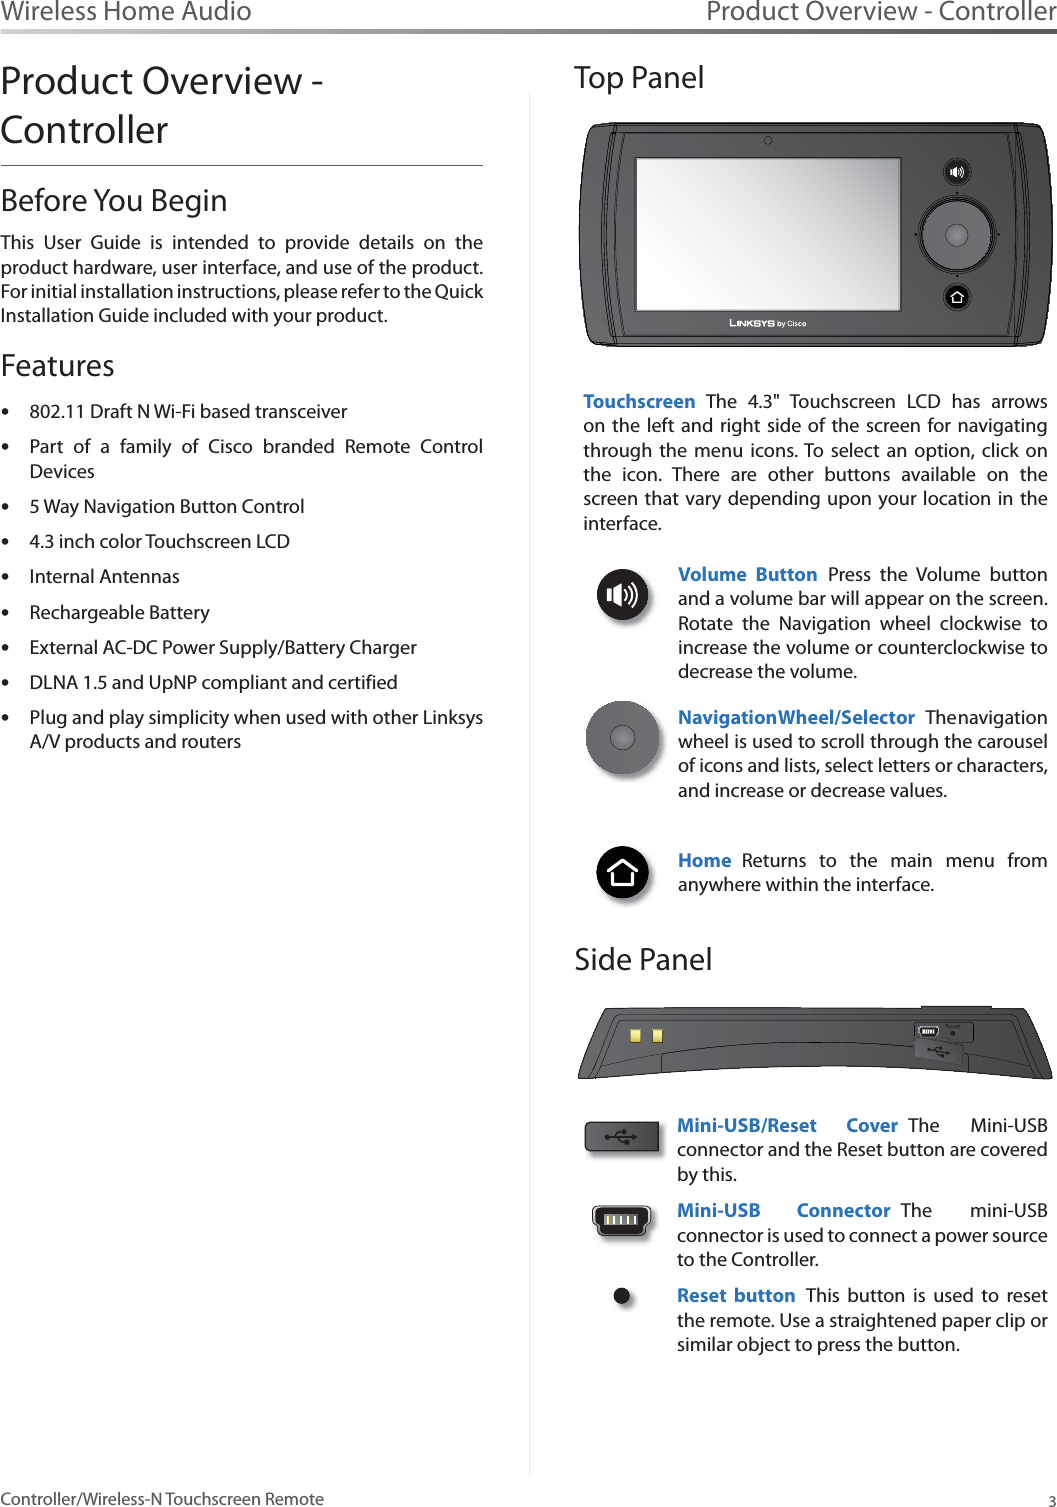 Product Overview - Controller3Controller/Wireless-N Touchscreen RemoteWireless Home AudioProduct Overview - ControllerBefore You BeginThis User Guide is intended to provide details on the product hardware, user interface, and use of the product. For initial installation instructions, please refer to the Quick Installation Guide included with your product. Features802.11 Draft N Wi-Fi based transceiver   sPart of a family of Cisco branded Remote Control sDevices  5 Way Navigation Button Control   s4.3 inch color Touchscreen LCD  sInternal Antennas   sRechargeable Battery   sExternal AC-DC Power Supply/Battery ChargersDLNA 1.5 and UpNP compliant and certifiedsPlug and play simplicity when used with other Linksys sA/V products and routers       Top PanelTouchscreen The 4.3&quot; Touchscreen LCD has arrows on the left and right side of the screen for navigating through the menu icons. To select an option, click on the icon. There are other buttons available on the screen that vary depending upon your location in the interface.Volume Button Press the Volume button and a volume bar will appear on the screen. Rotate the Navigation wheel clockwise to increase the volume or counterclockwise to decrease the volume. Navigation Wheel/S elec tor The navigation wheel is used to scroll through the carousel of icons and lists, select letters or characters, and increase or decrease values.Home Returns to the main menu from anywhere within the interface. Side PanelMini-USB/Reset Cover The Mini-USB connector and the Reset button are covered by this.   Mini-USB Connector The mini-USB connector is used to connect a power source to the Controller. Reset button This button is used to reset the remote. Use a straightened paper clip or similar object to press the button. 